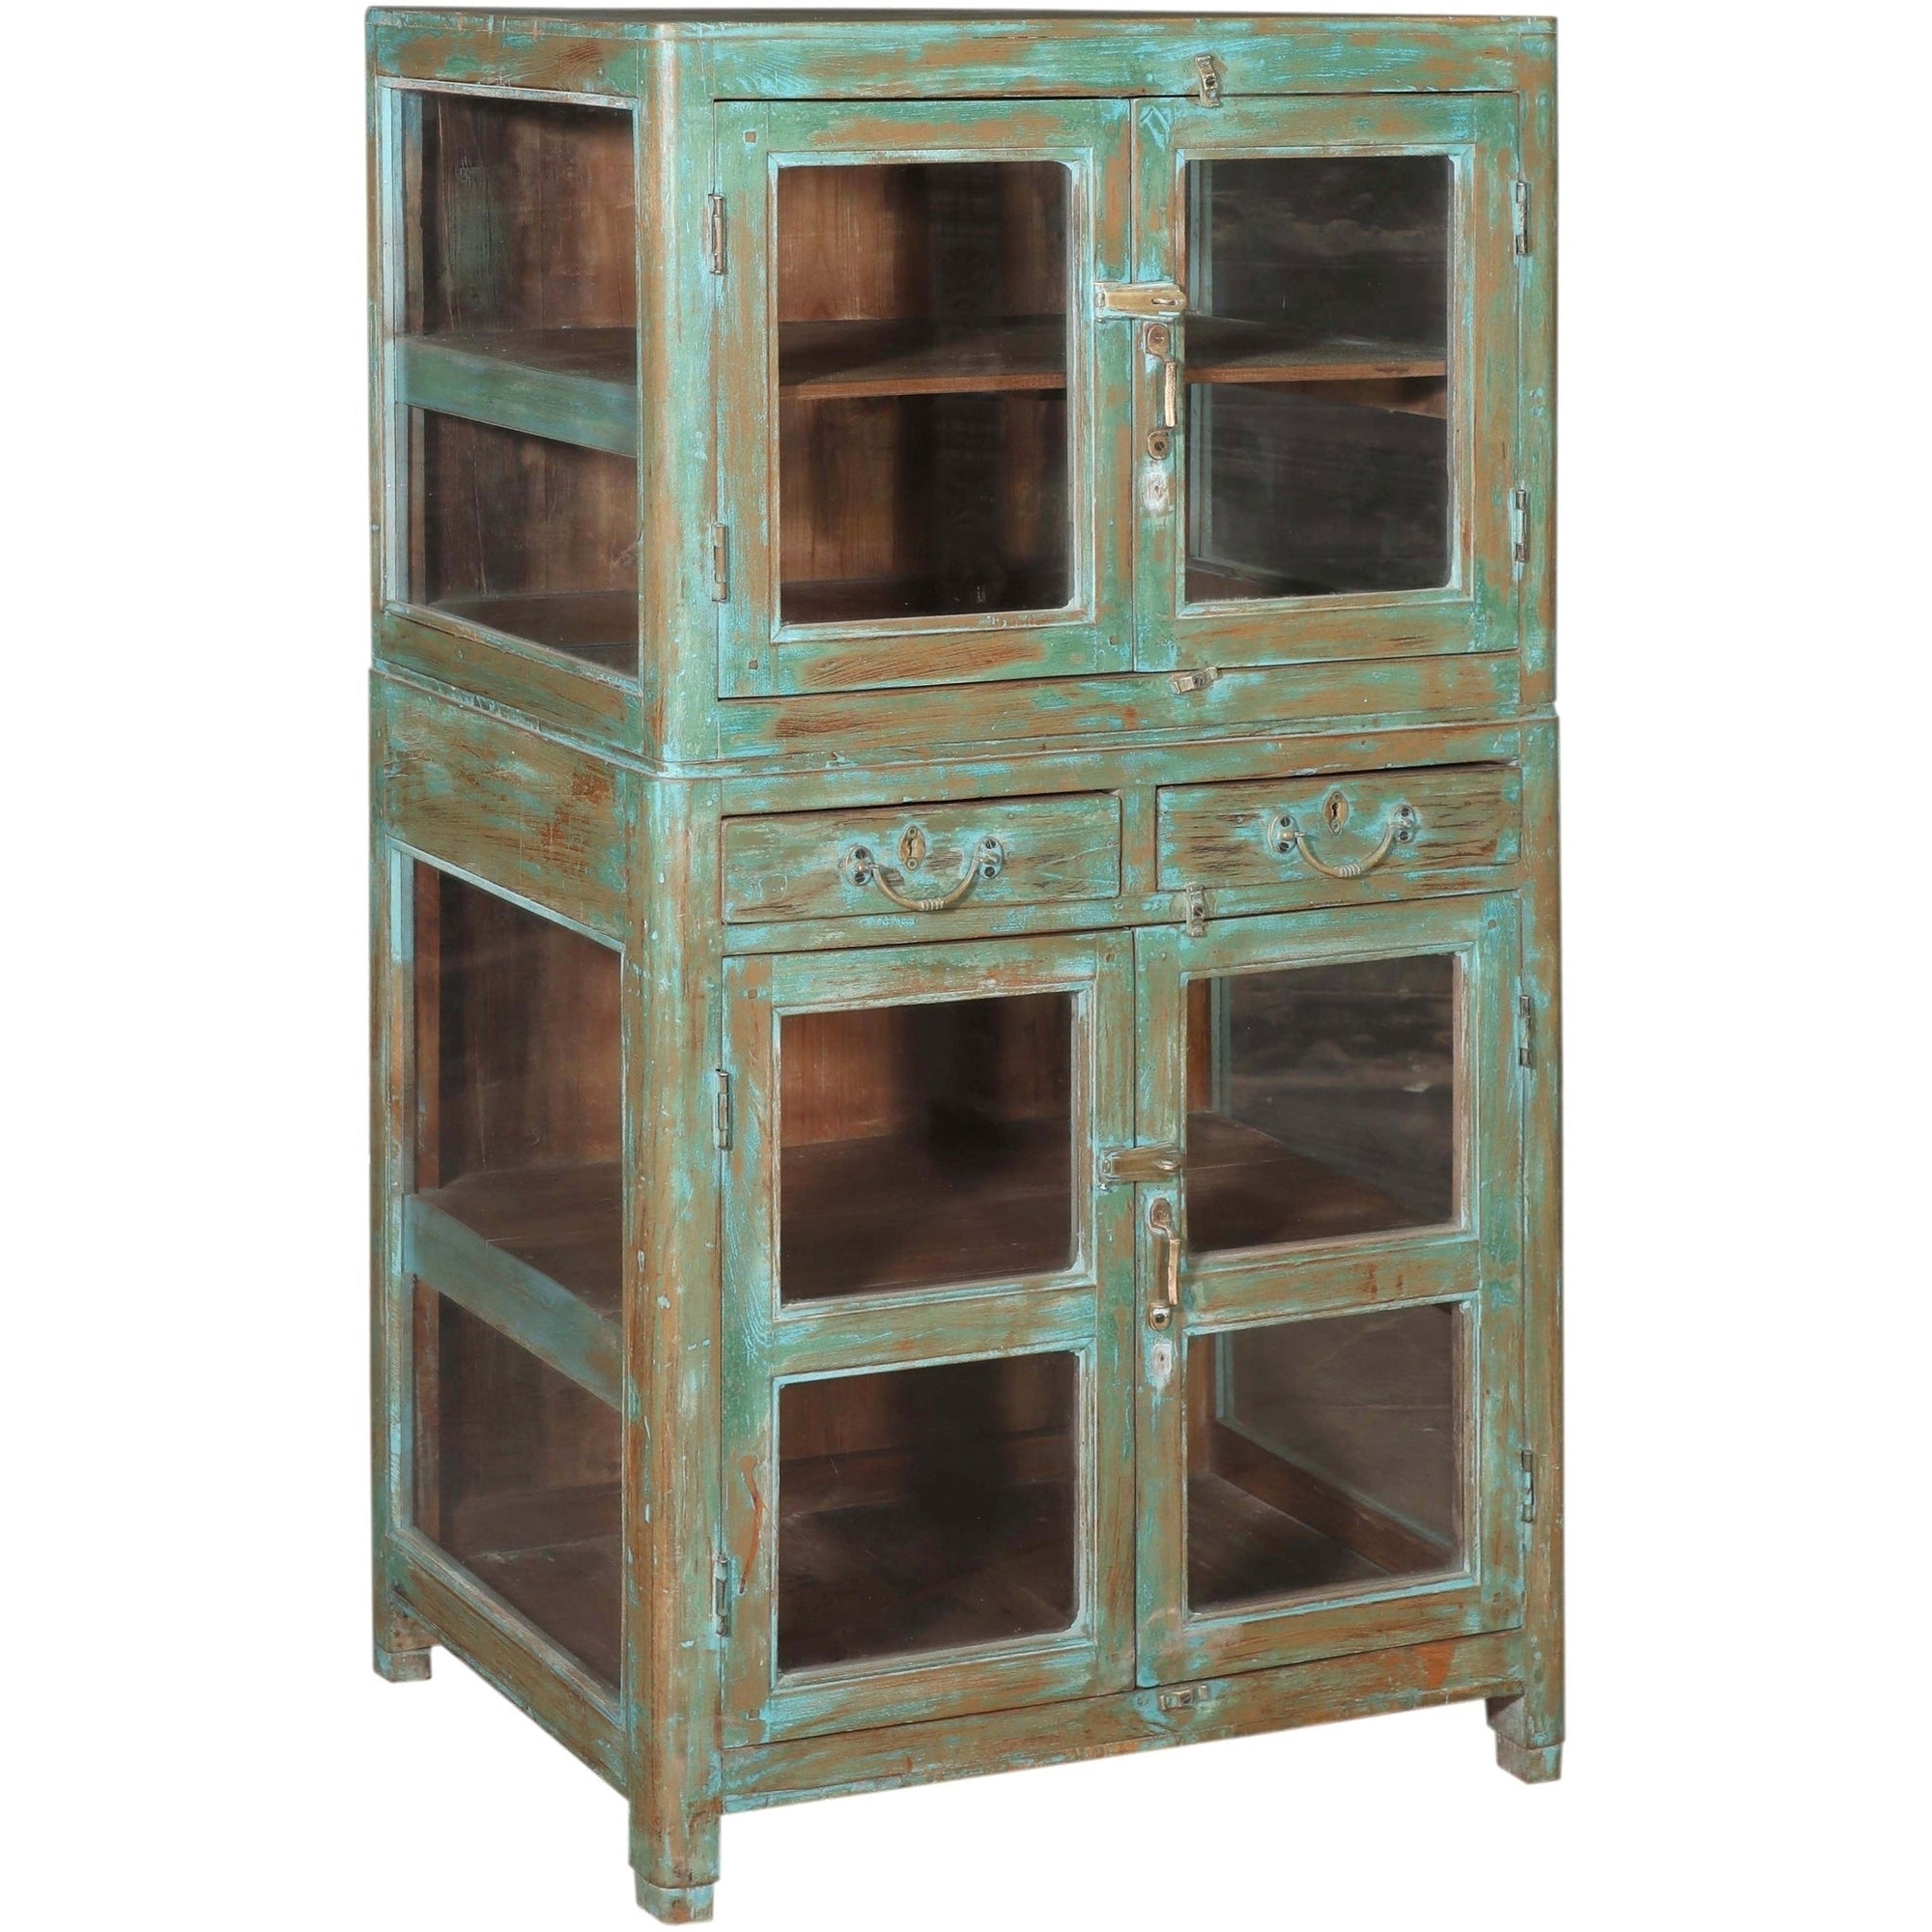 RM-059400, Wooden Cabinet With Glass, Teak, 50+Yrs Old - iDekor8